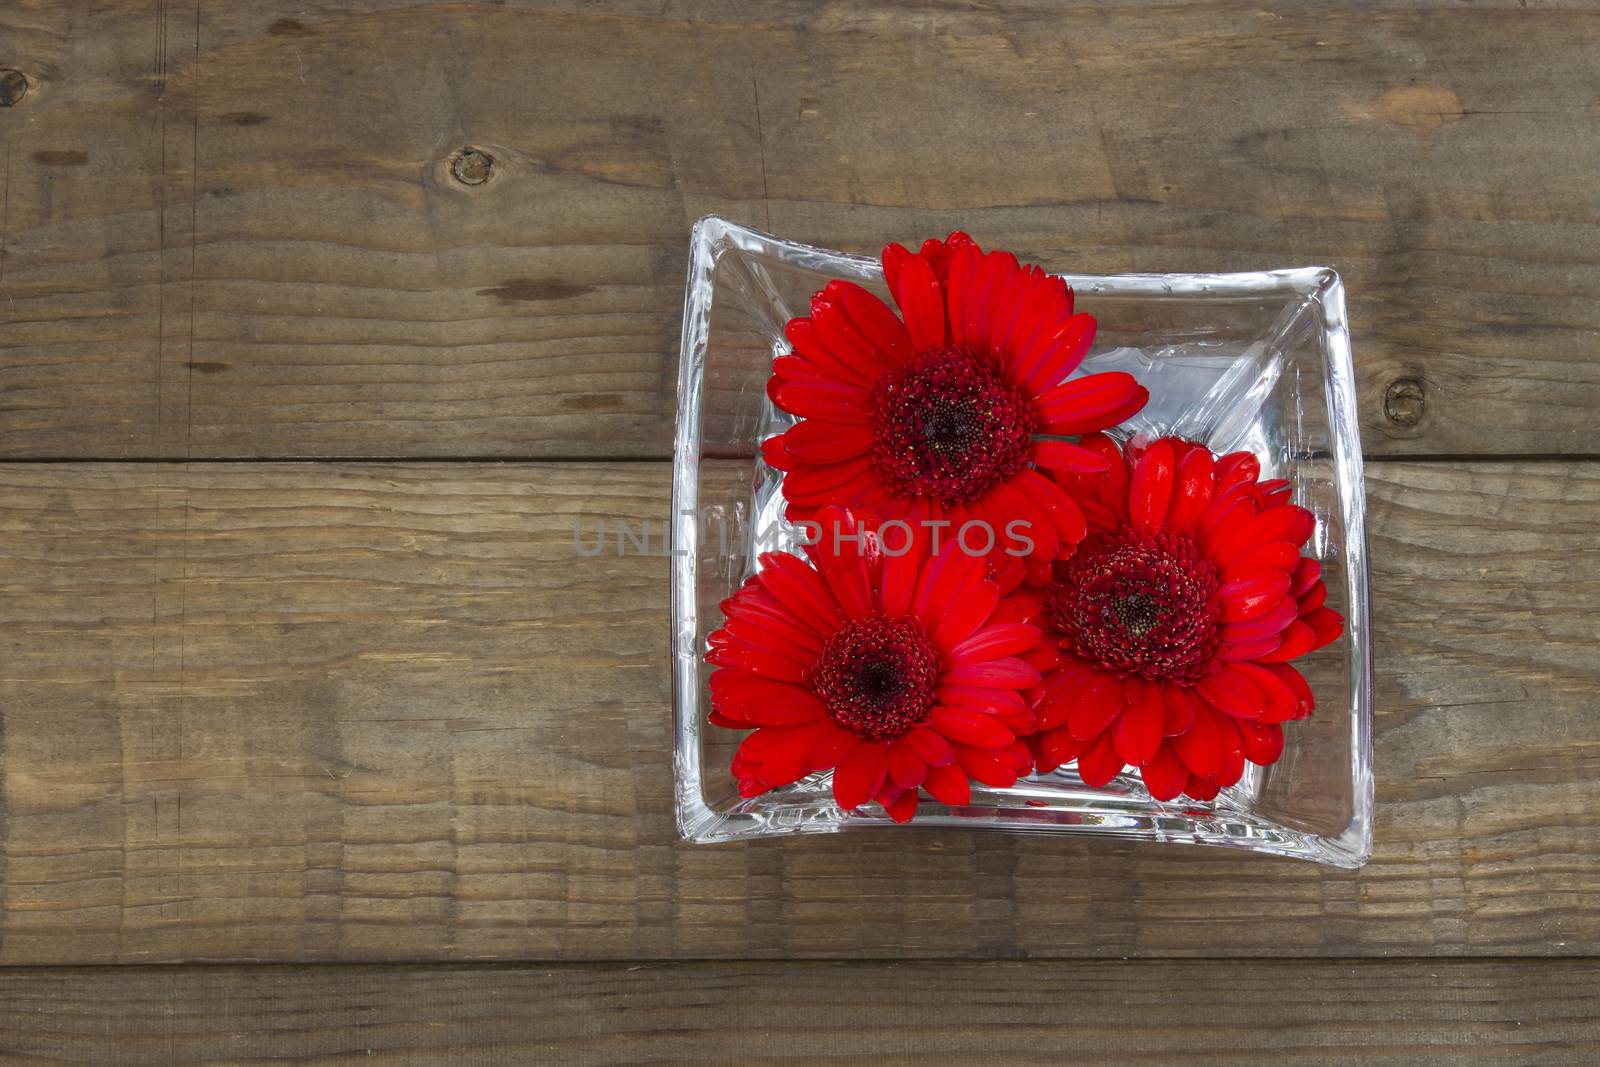 red gerbera flowers on wooden background by miradrozdowski